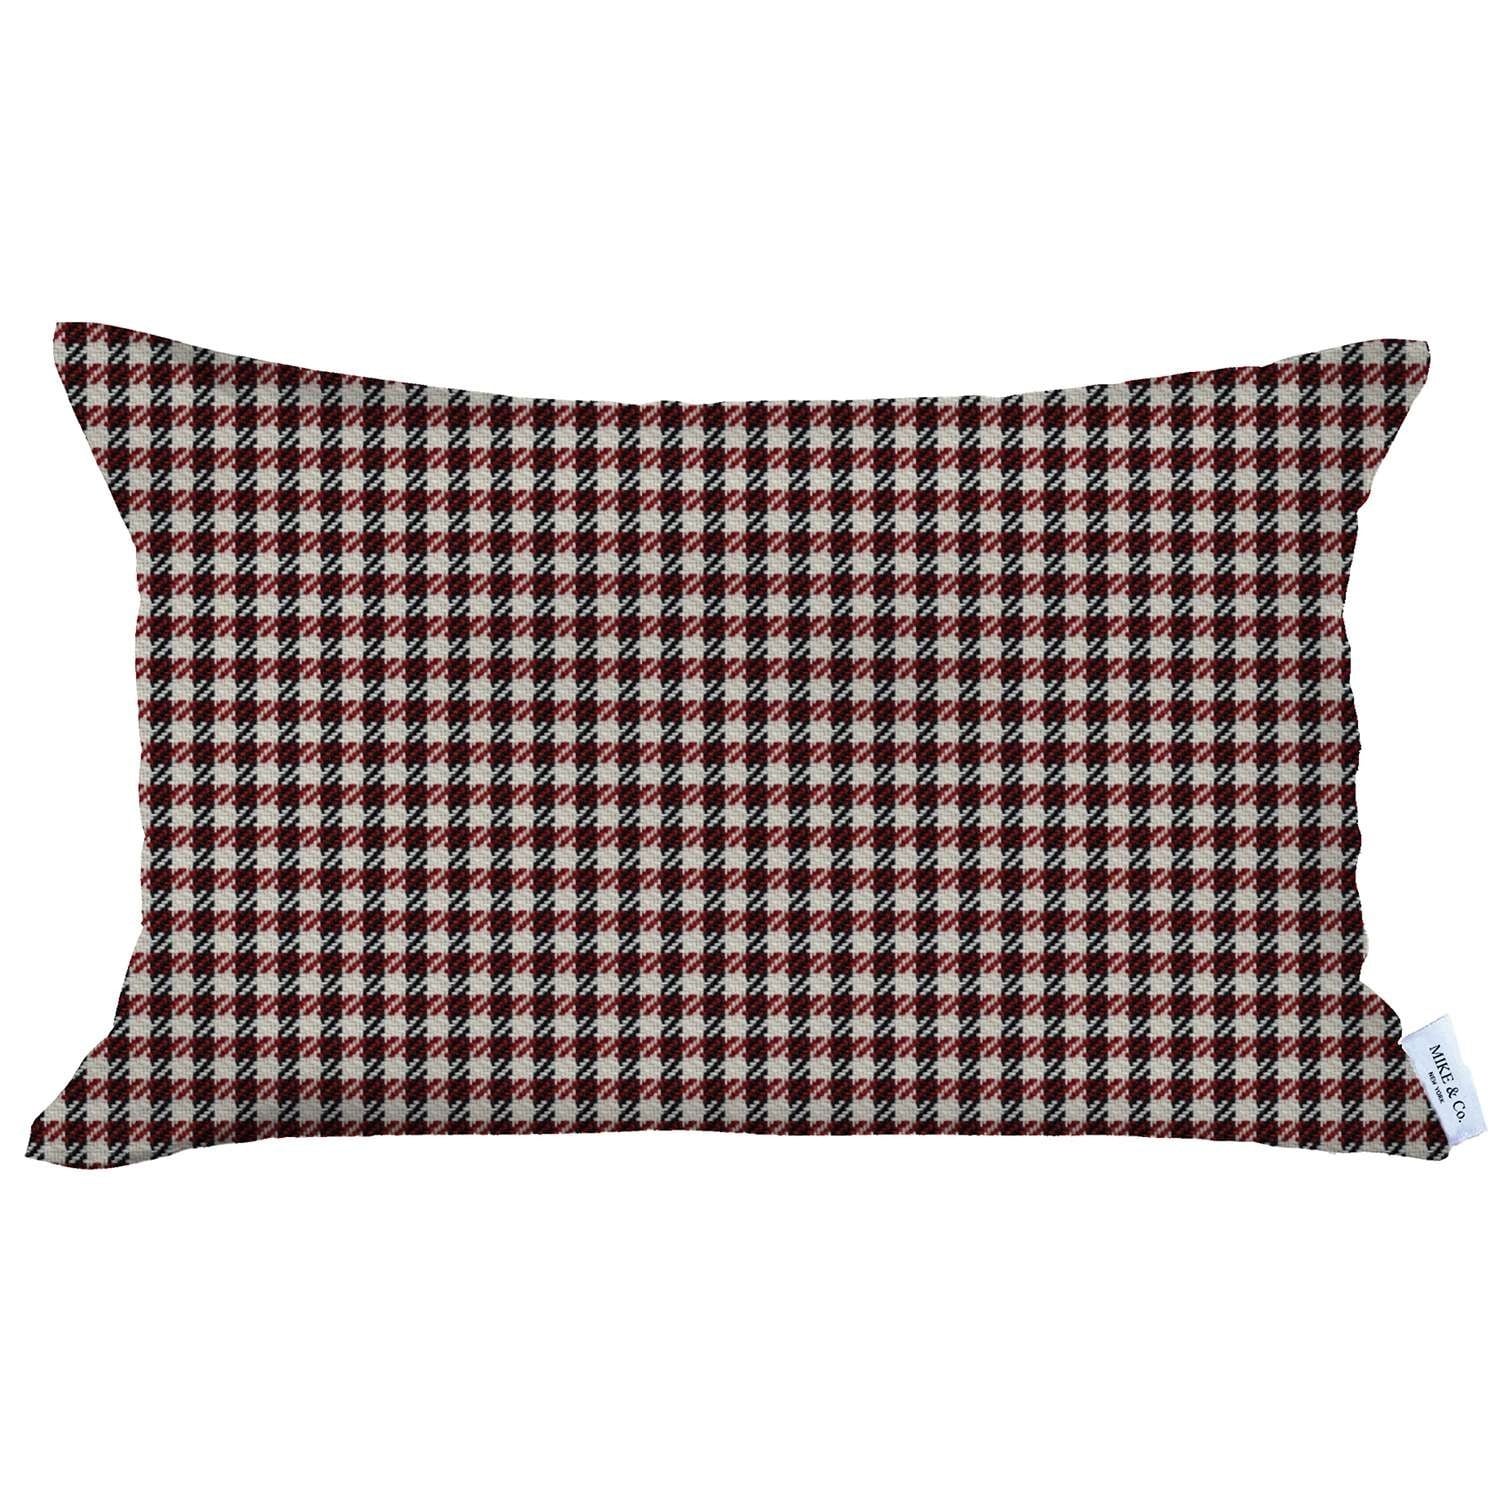 https://ak1.ostkcdn.com/images/products/is/images/direct/f8afc1f1dc87f8ffb03940f880b86df9606853d6/Red-Houndstooth-Lumbar-Throw-Pillow.jpg